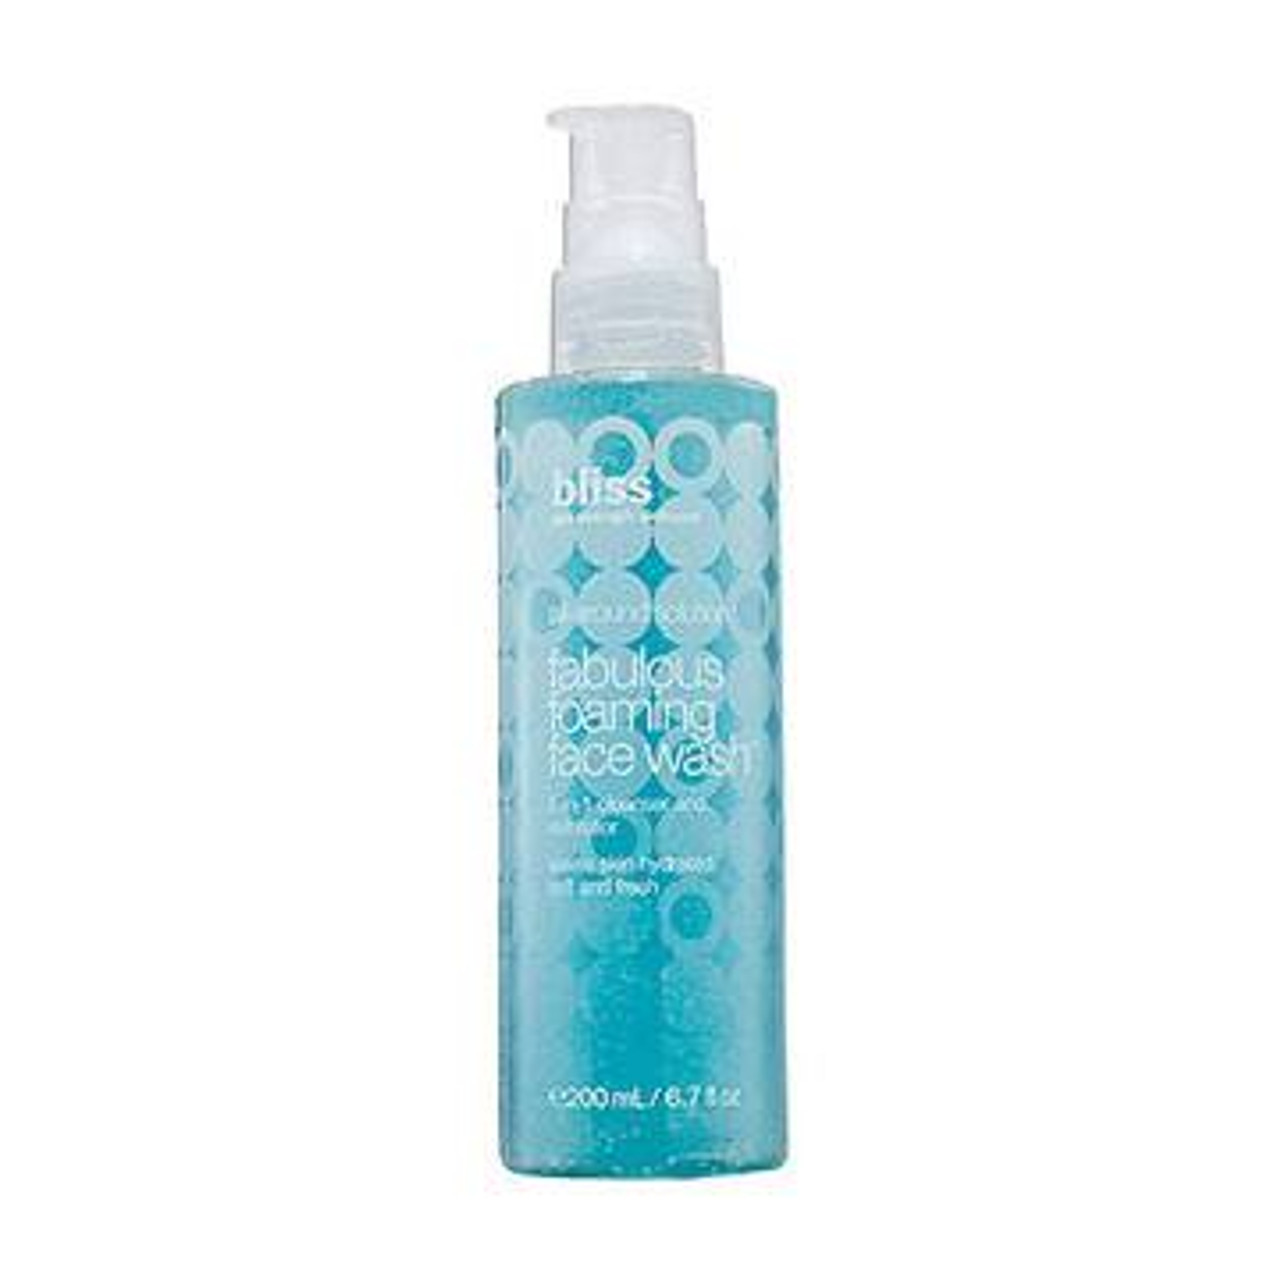 Bliss Fabulous Foaming Face Wash - 6.6 oz ® on Sale at $18.7 - Free ...